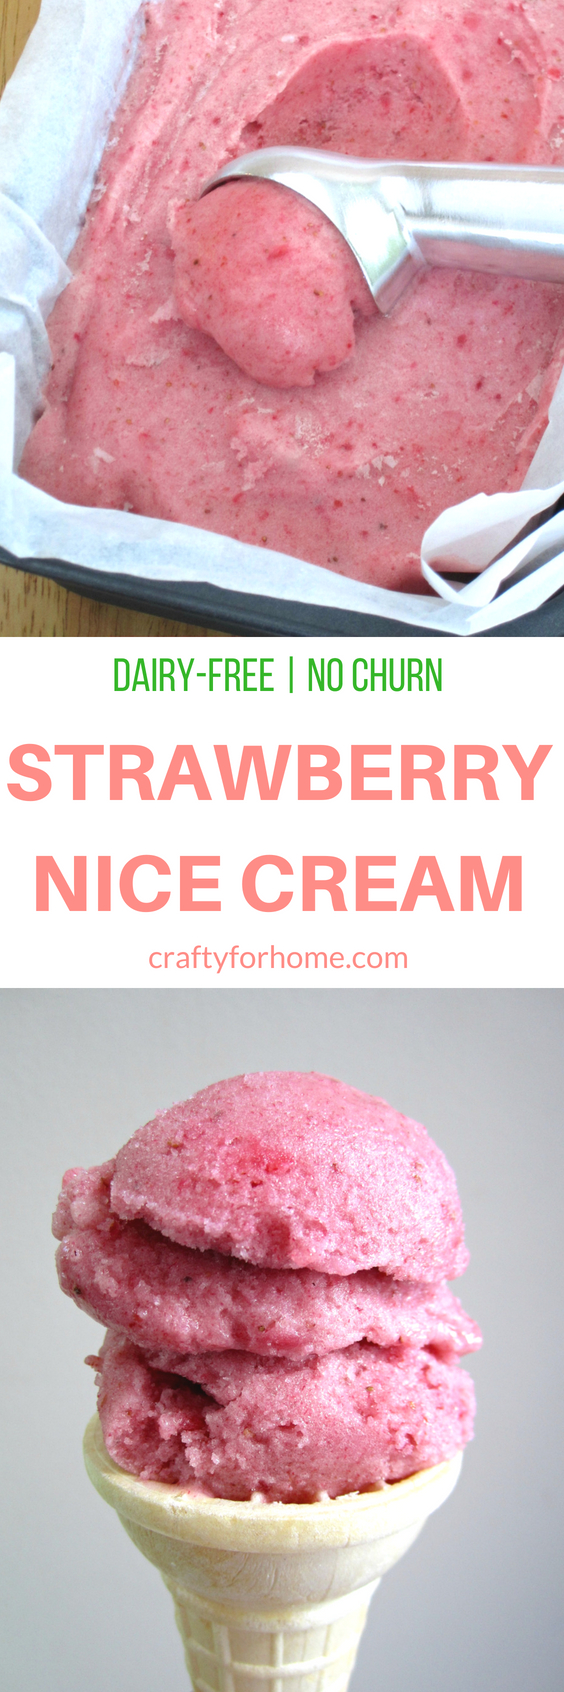 Strawberry Nice Cream | Homemade and healthy no-churn strawberry ice cream recipe with only two ingredients. #dairyfreeicecream #strawberrynicecream #strawberryicecream #nochurnicecream for full recipe on craftyforhome.com